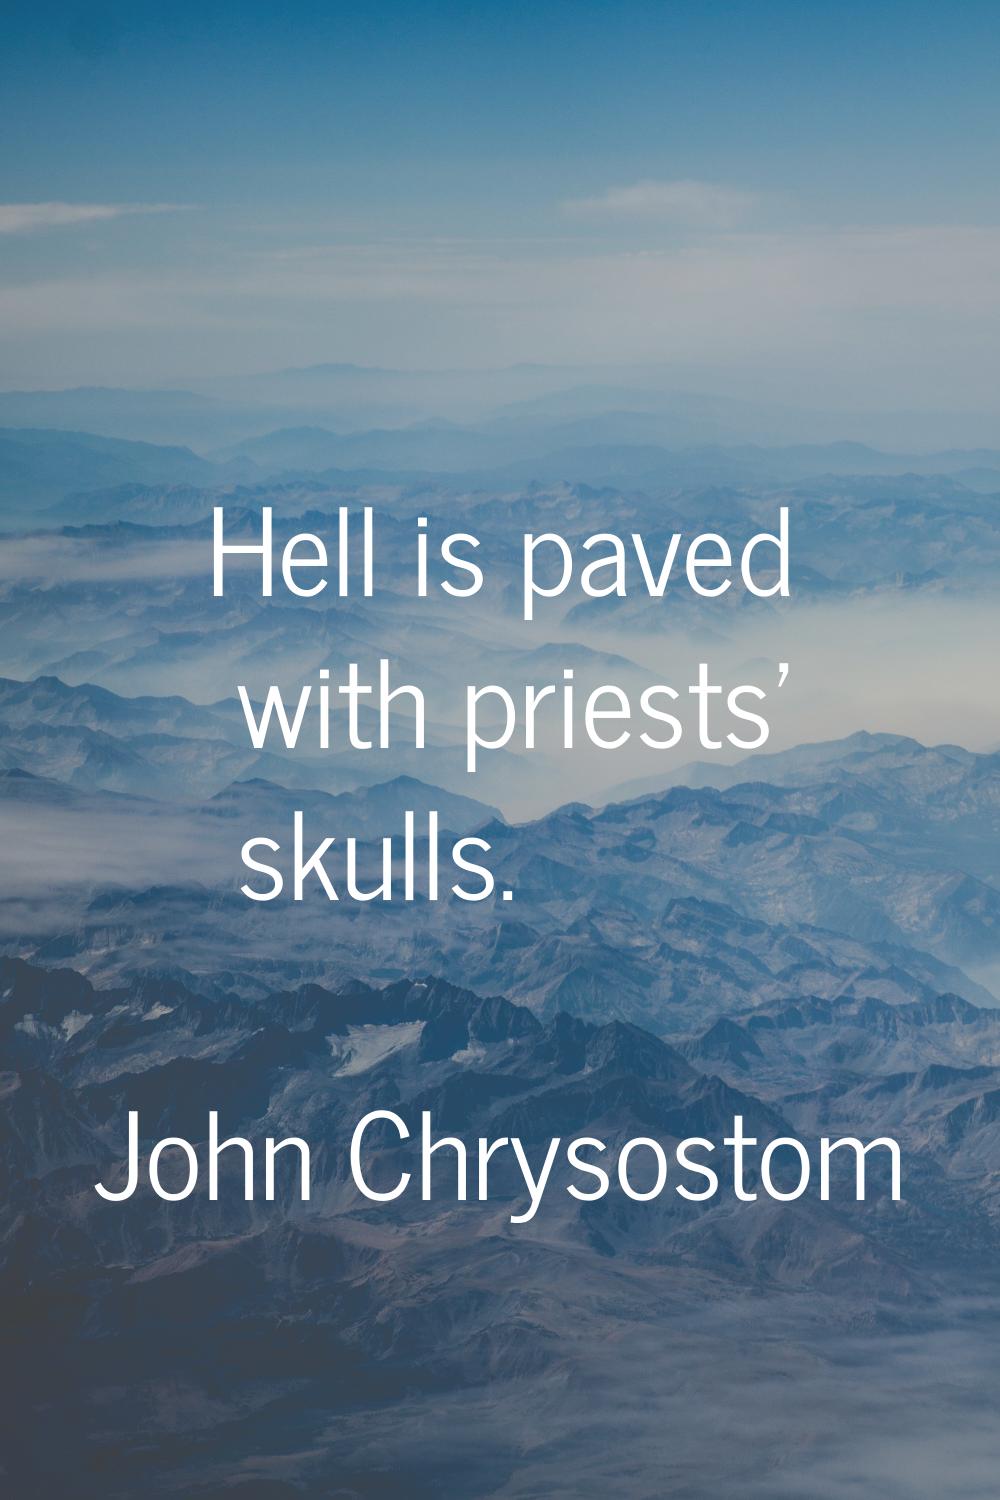 Hell is paved with priests' skulls.